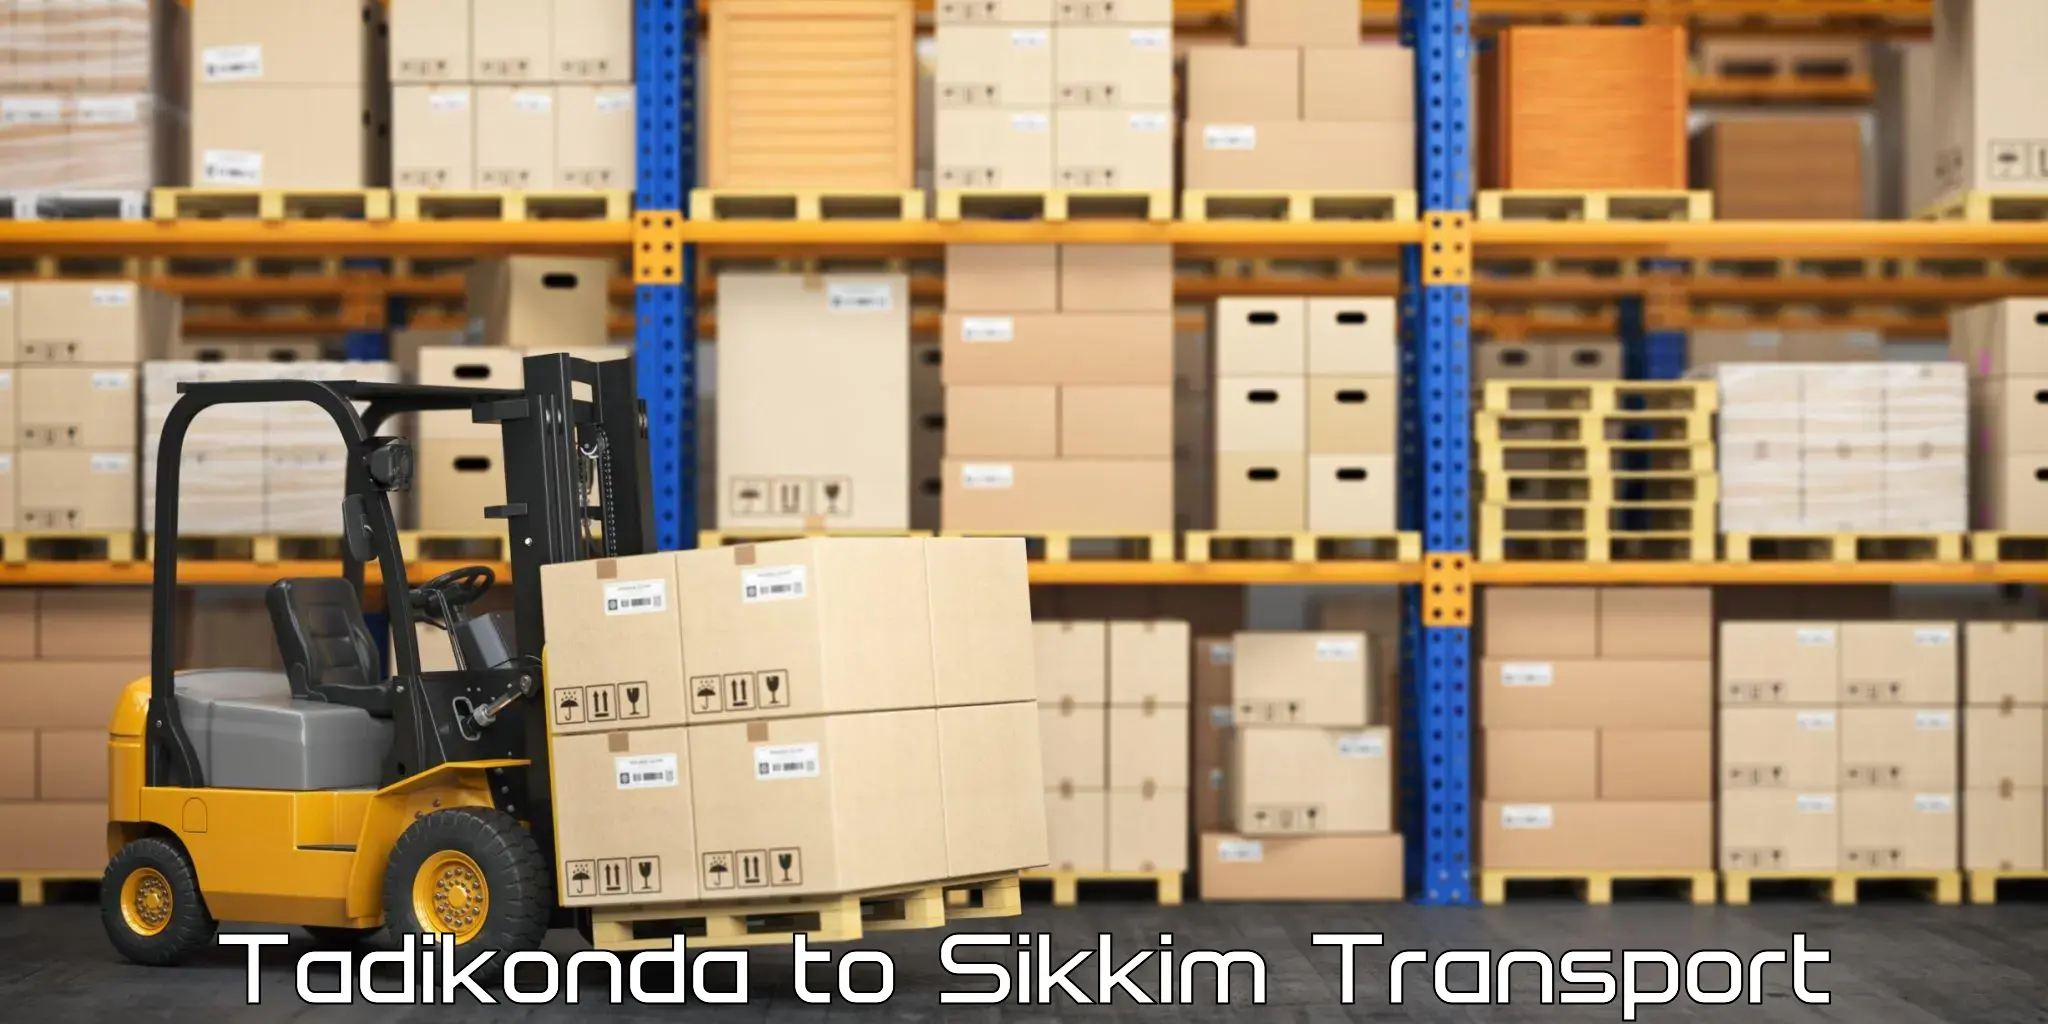 Goods delivery service Tadikonda to South Sikkim